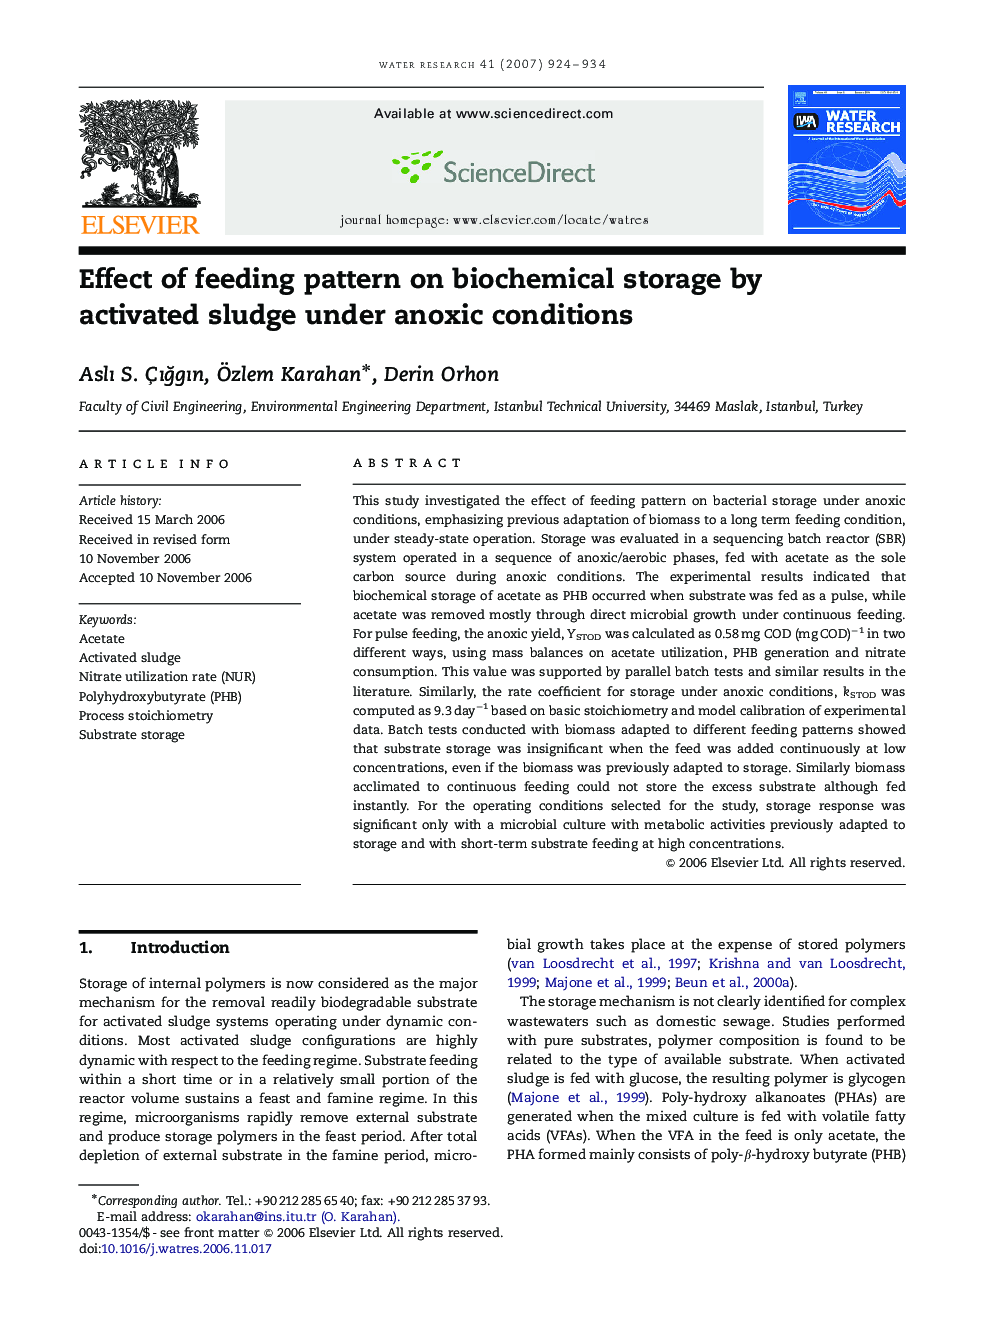 Effect of feeding pattern on biochemical storage by activated sludge under anoxic conditions